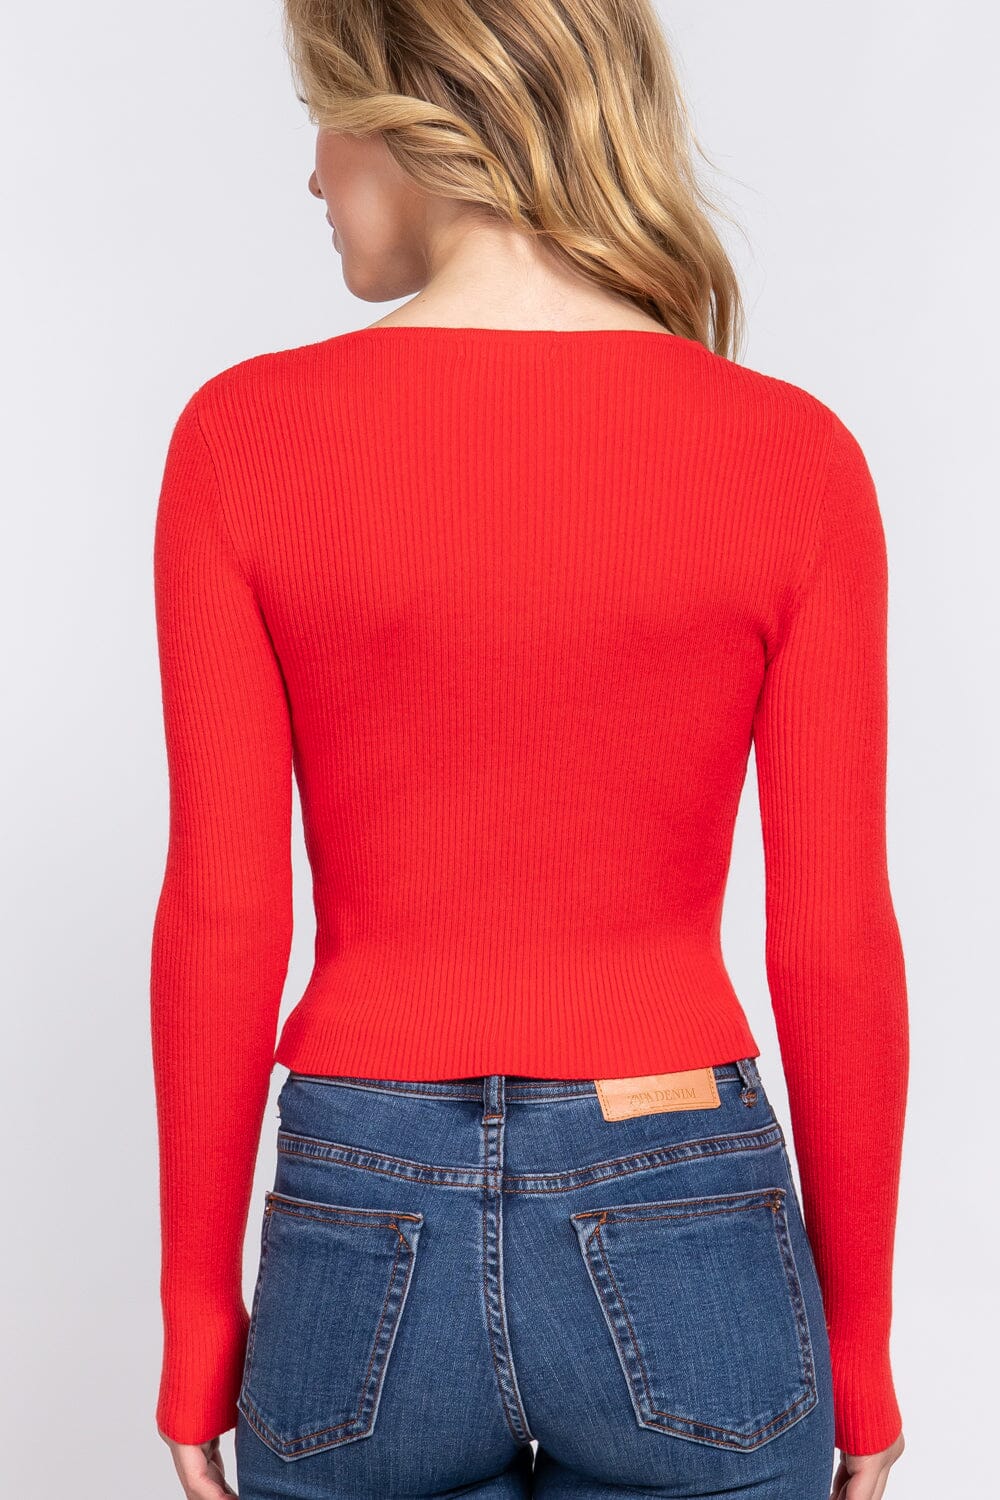 Red Long Sleeve V Neck Front Shirring Tie Rib Crop Sweater Shirts & Tops jehouze 